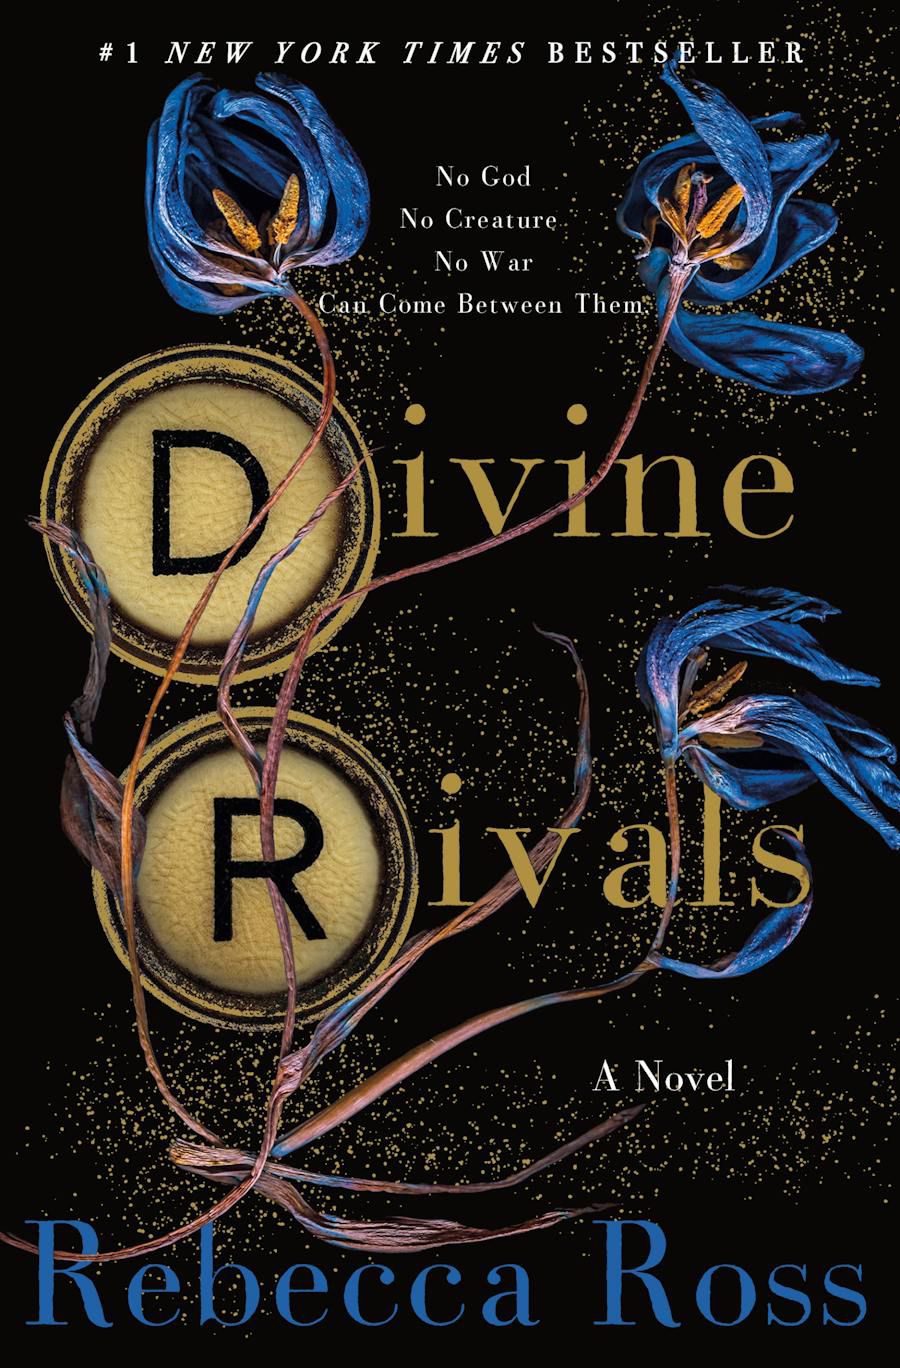 Cover for Rebecca Ross’s Divine Rivals. The D and R are enclosed in circles, while flowers spread around the rest of the cover.